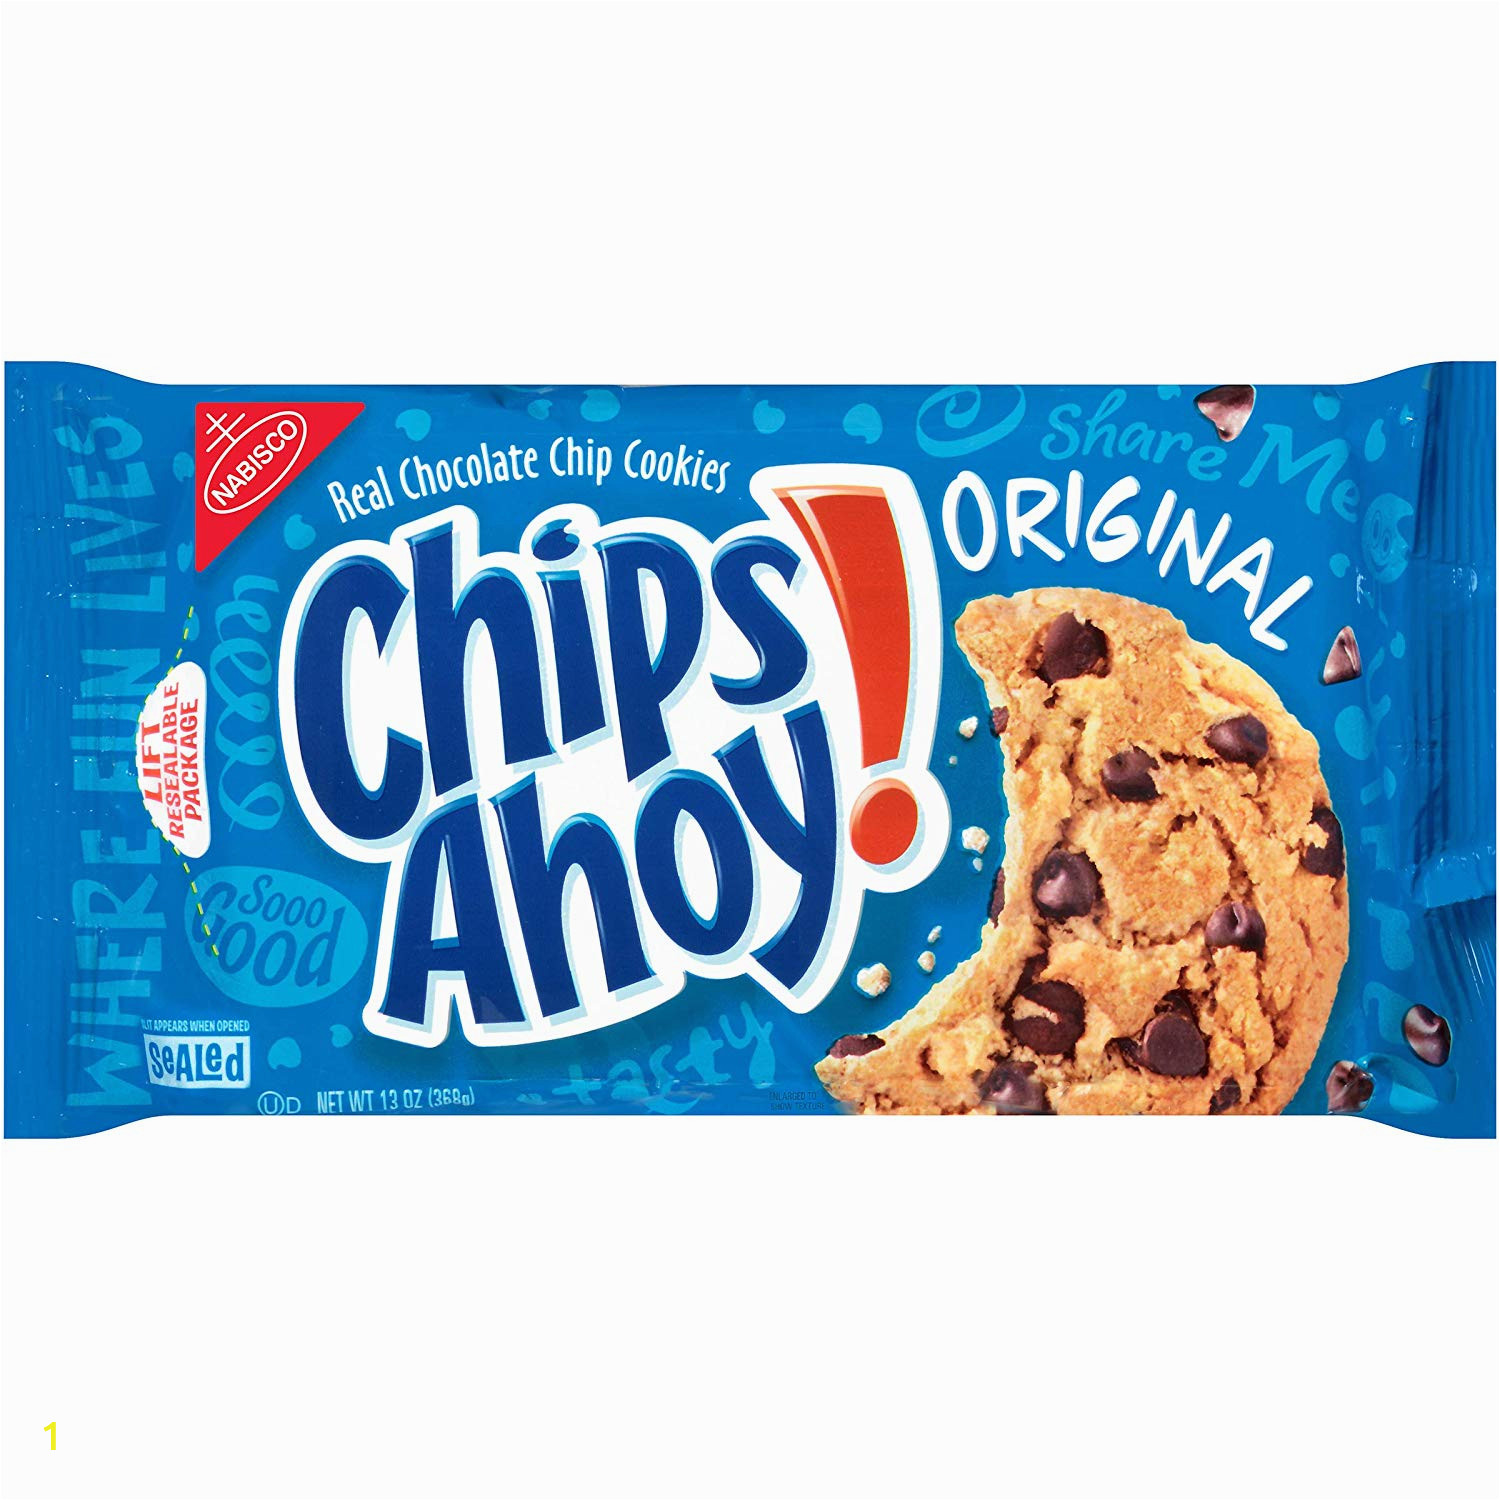 Chocolate Chip Cookie Coloring Page Chips Ahoy original Chocolate Chip Cookies 12 Pack 13 Oz